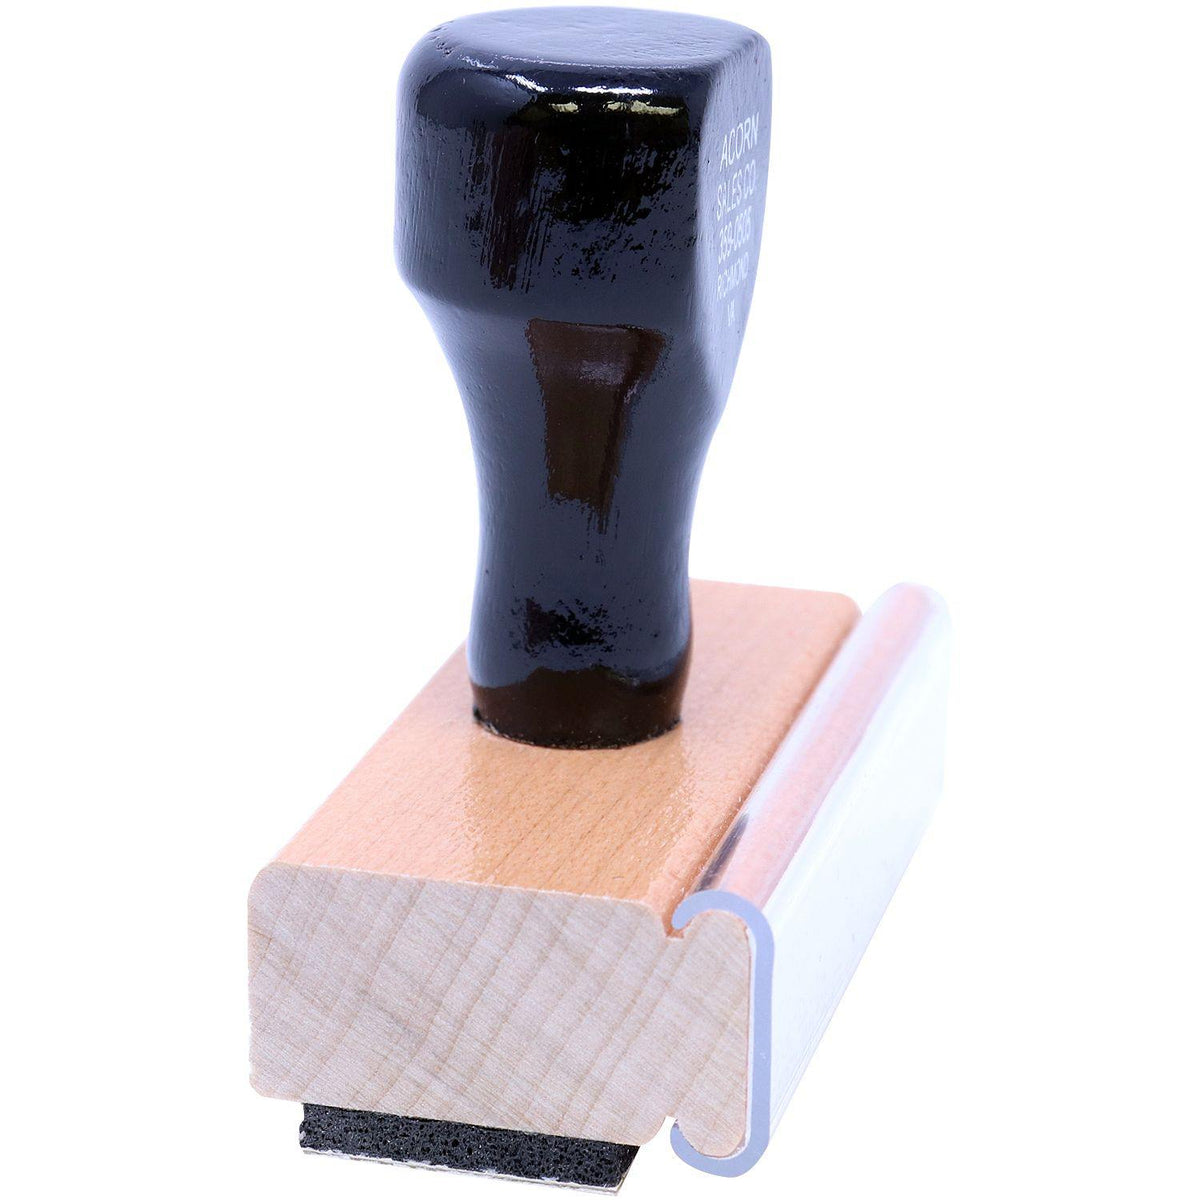 Side View of Cash Rubber Stamp at an Angle